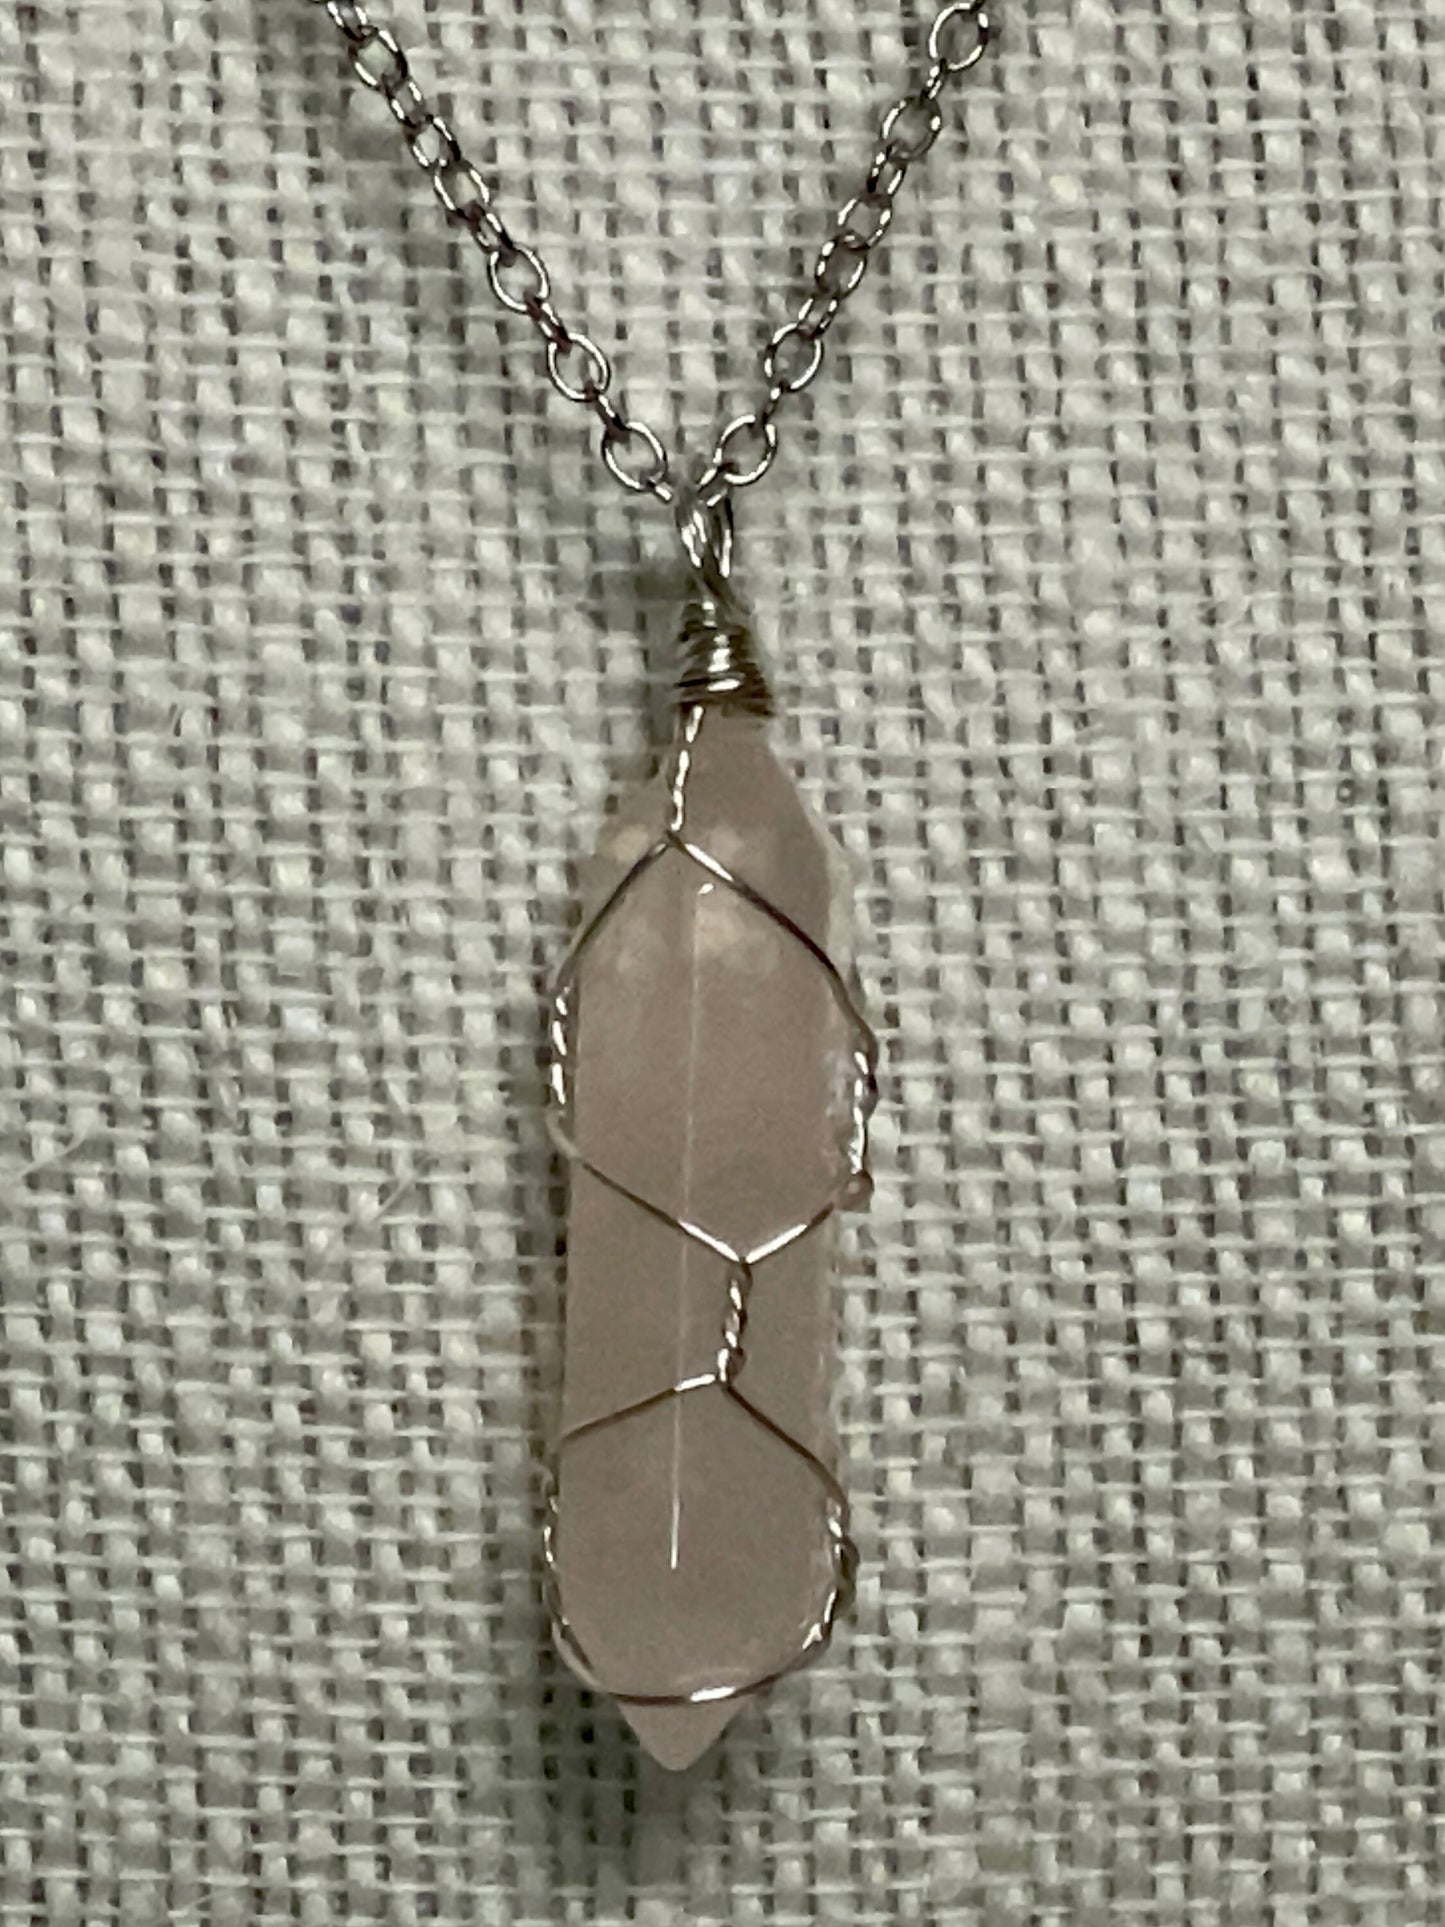 Silver Wire Wrapped Crystal Gemstone Necklaces, Rose Quartz, Amethyst, Opal, Black Obsidian, Healing Stone Chakra Point Birthstone Necklaces